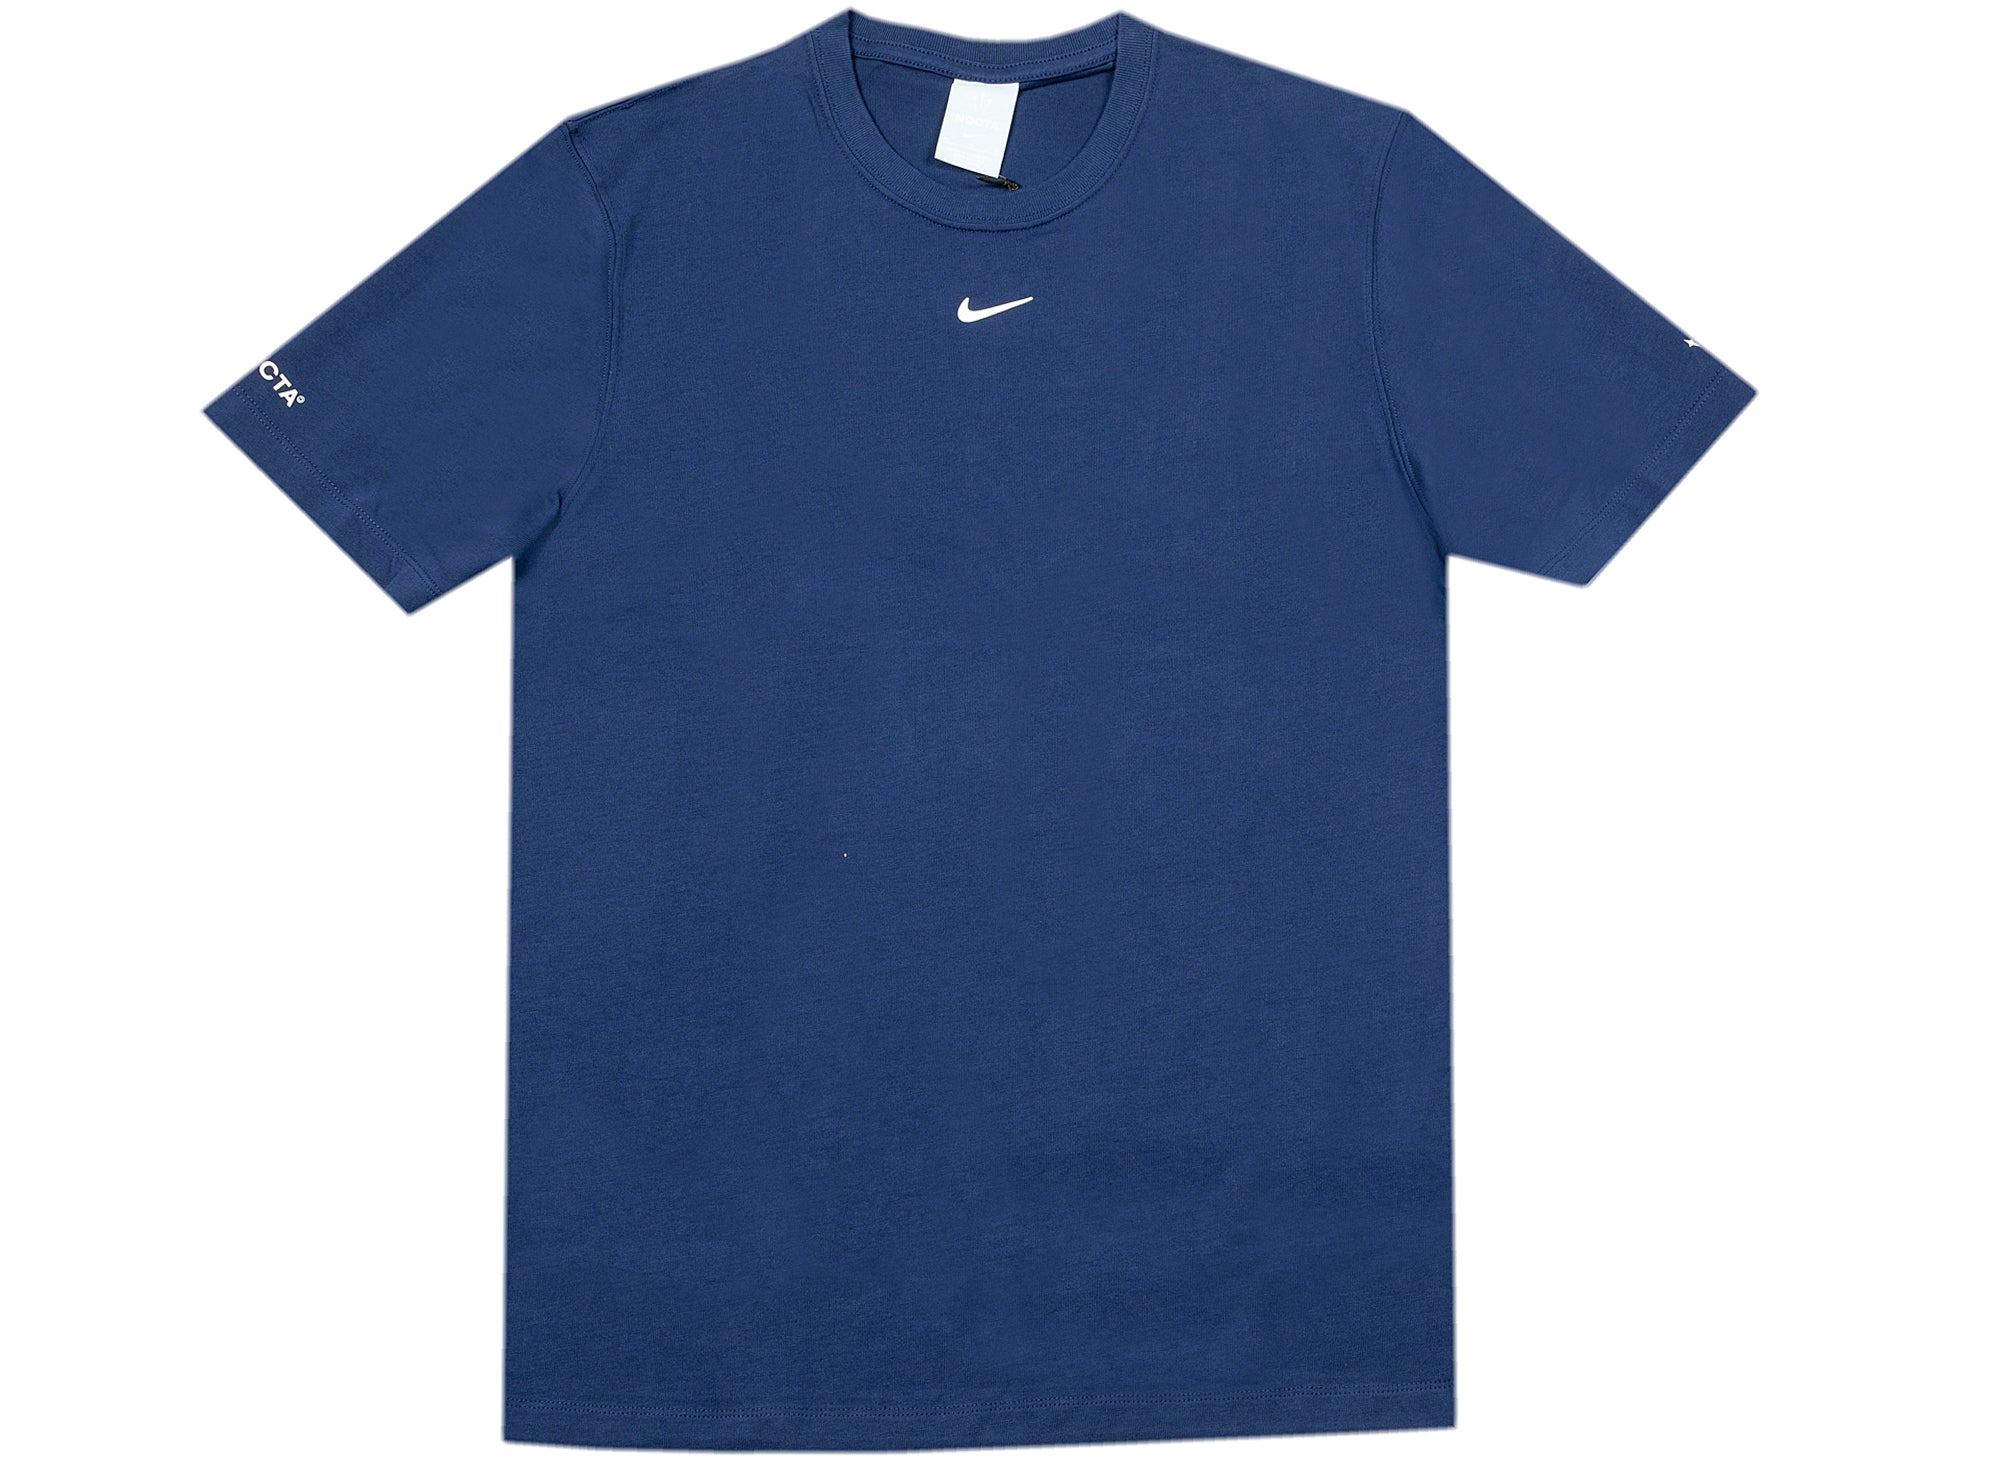 Nike NRG NOCTA GPX Short Sleeve Tee in Blue xld - Oneness Boutique